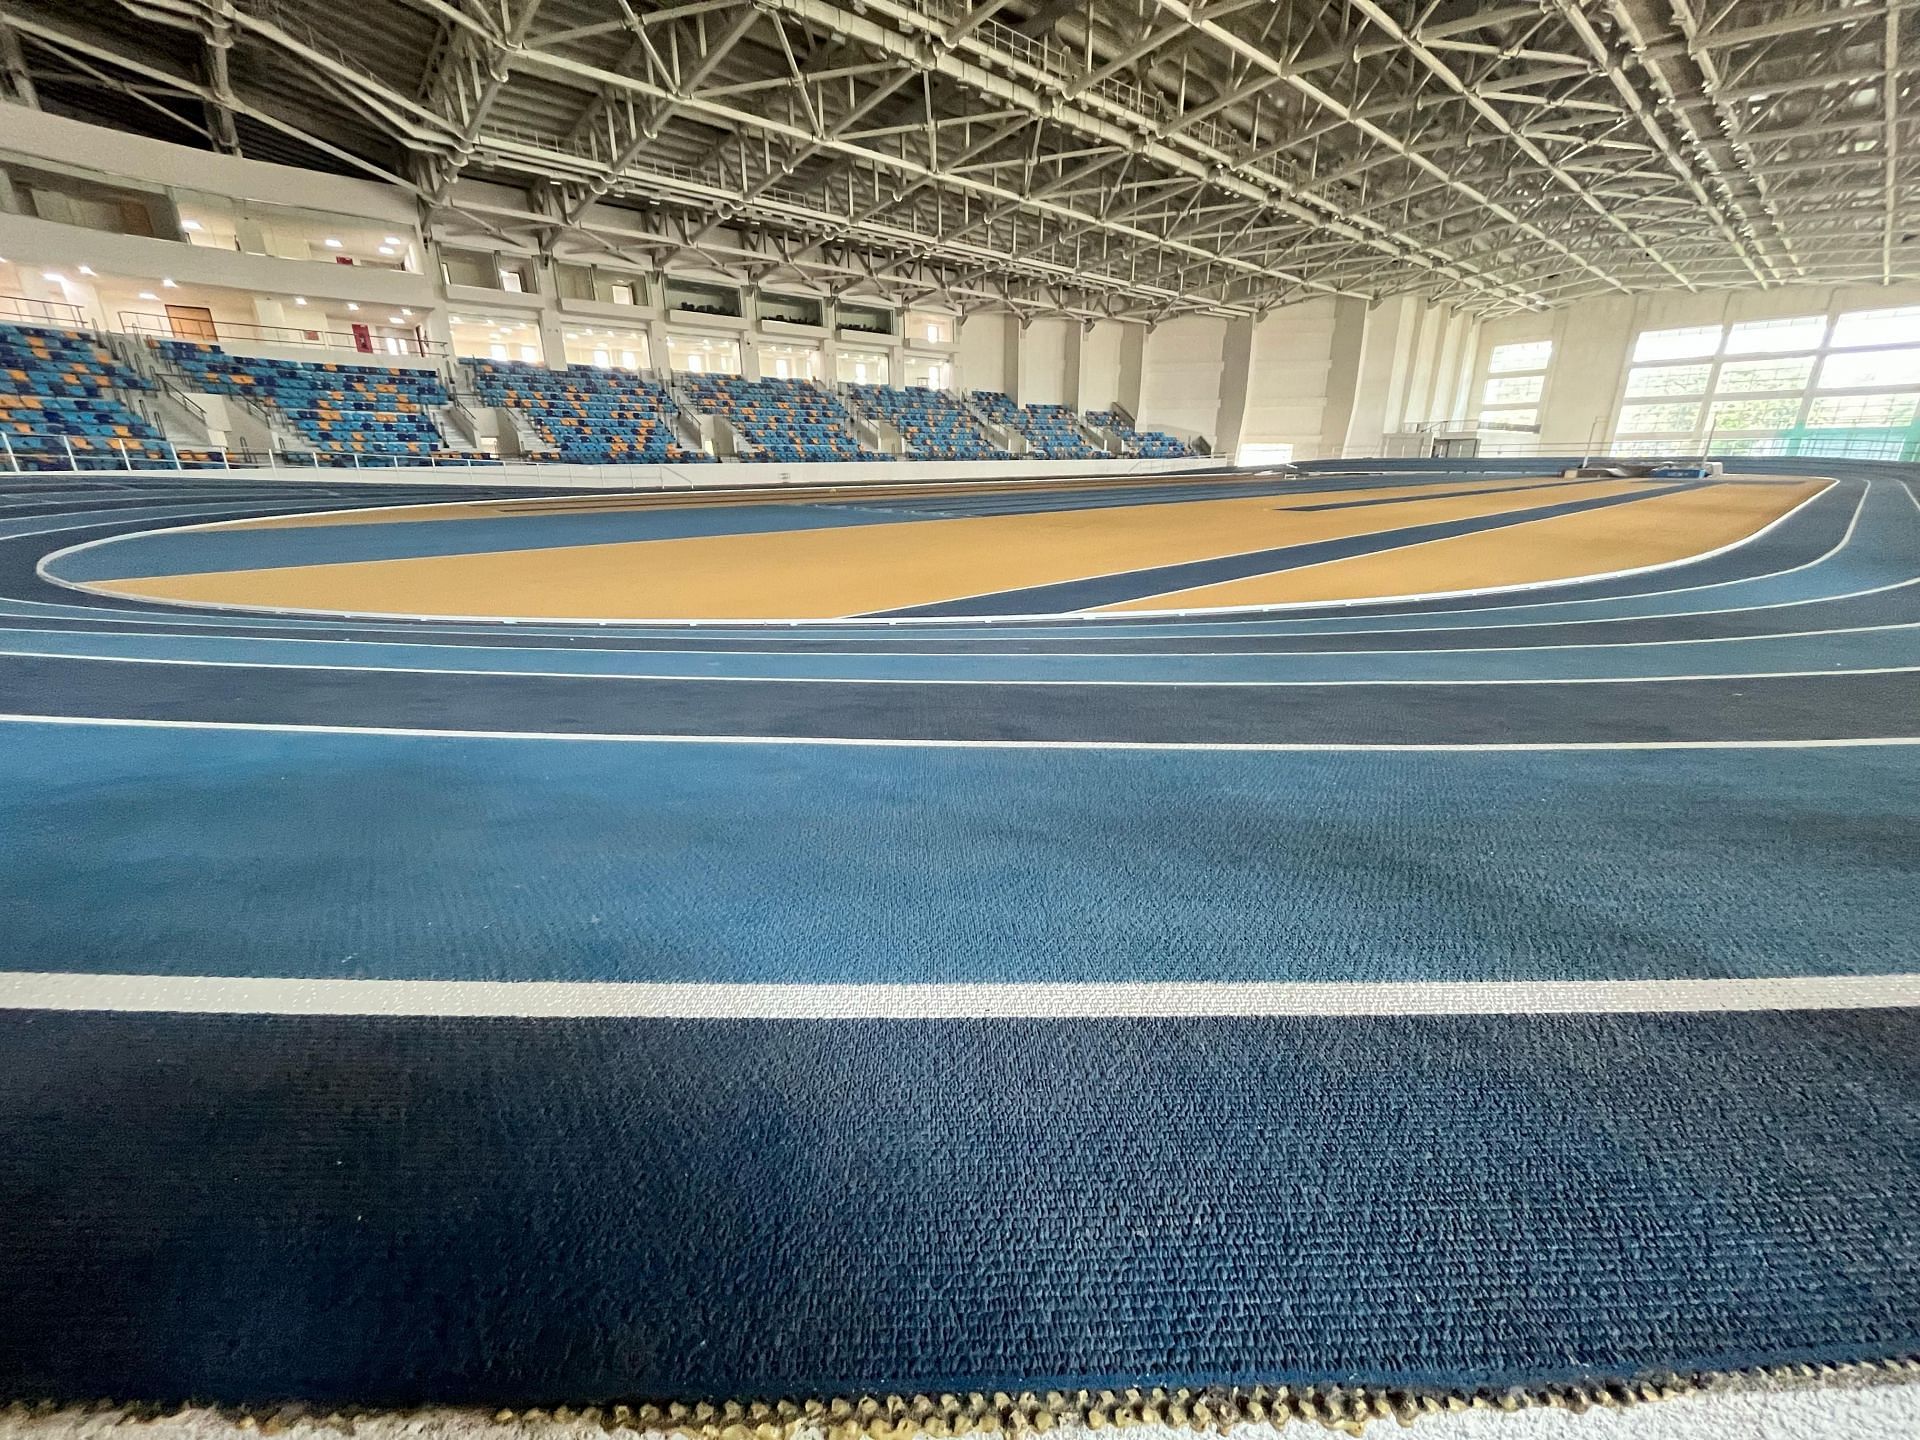 The indoor athletics centre in Bhubaneswar is ready to host top-level international events | Credit: Maanas